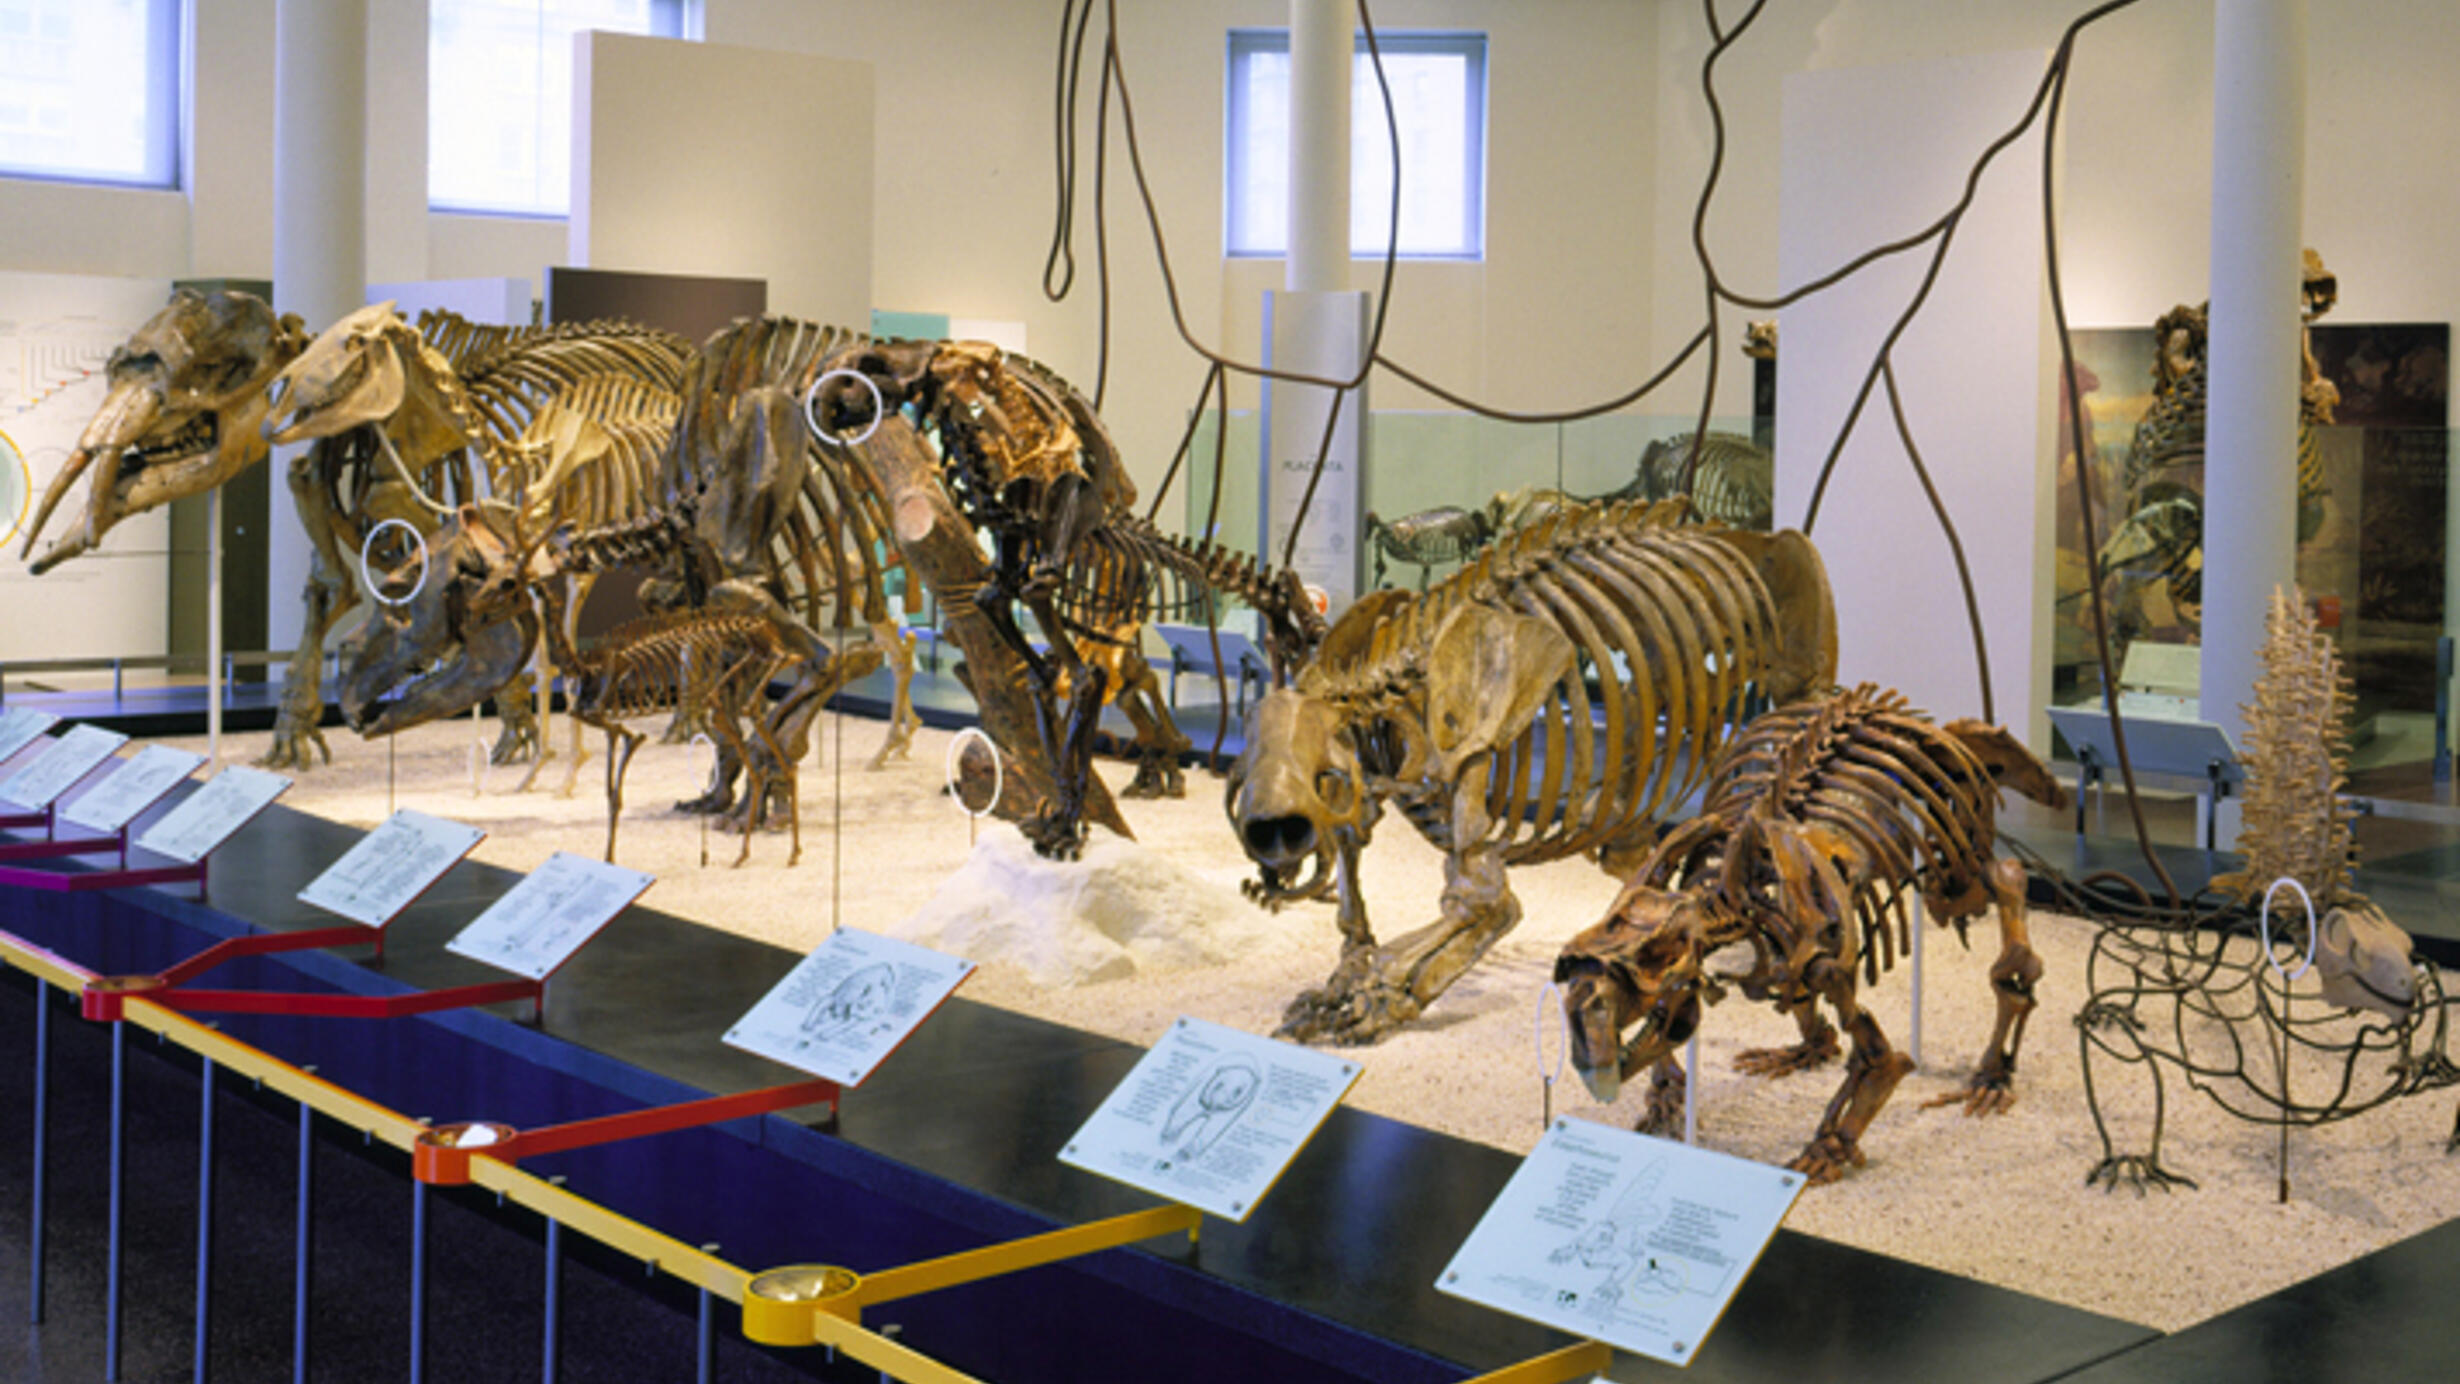 An exhibition platform containing fossil skeletons of approximately eight quadrupedal animals.